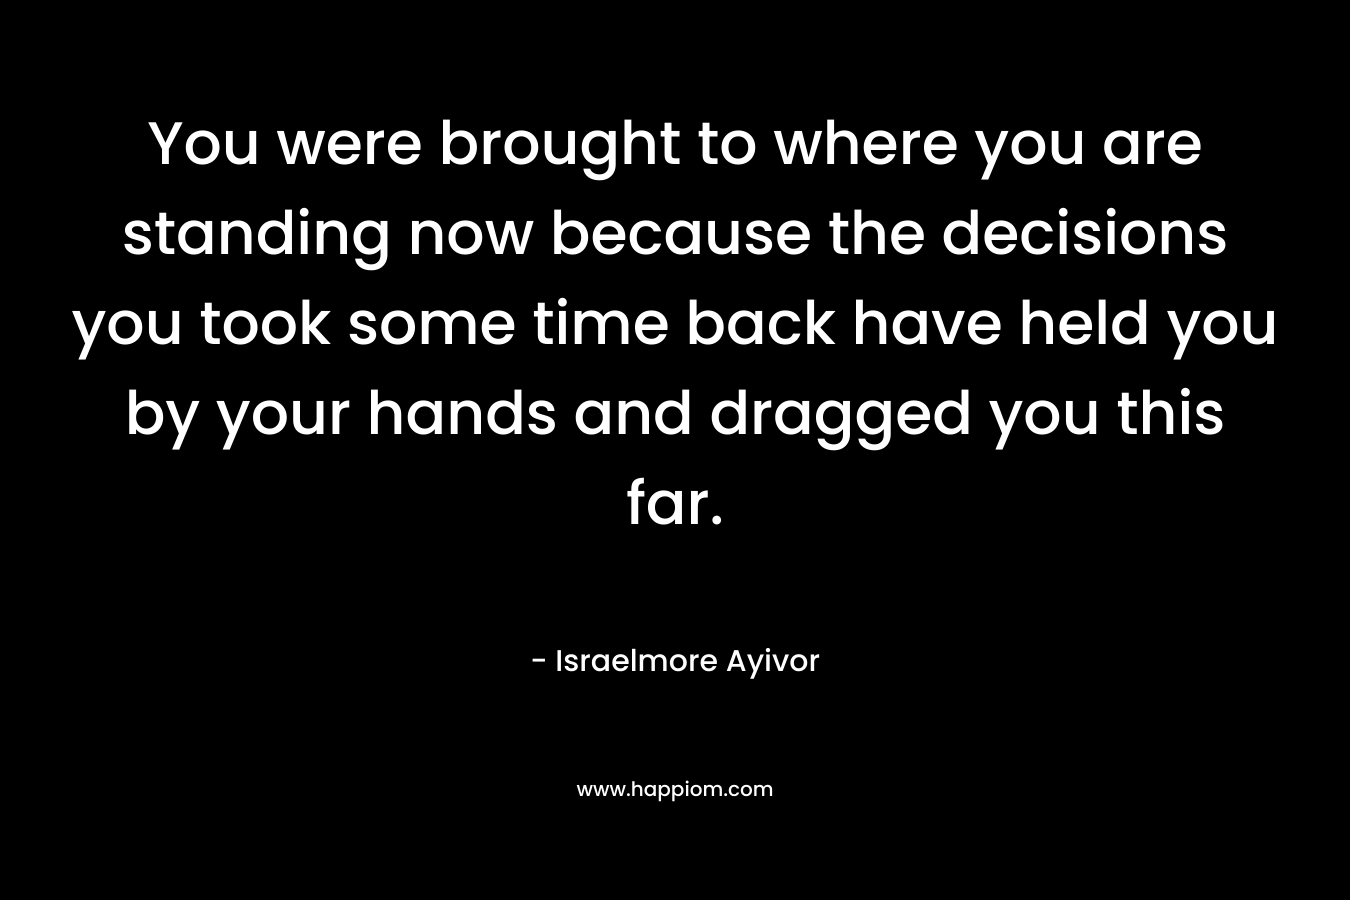 You were brought to where you are standing now because the decisions you took some time back have held you by your hands and dragged you this far.